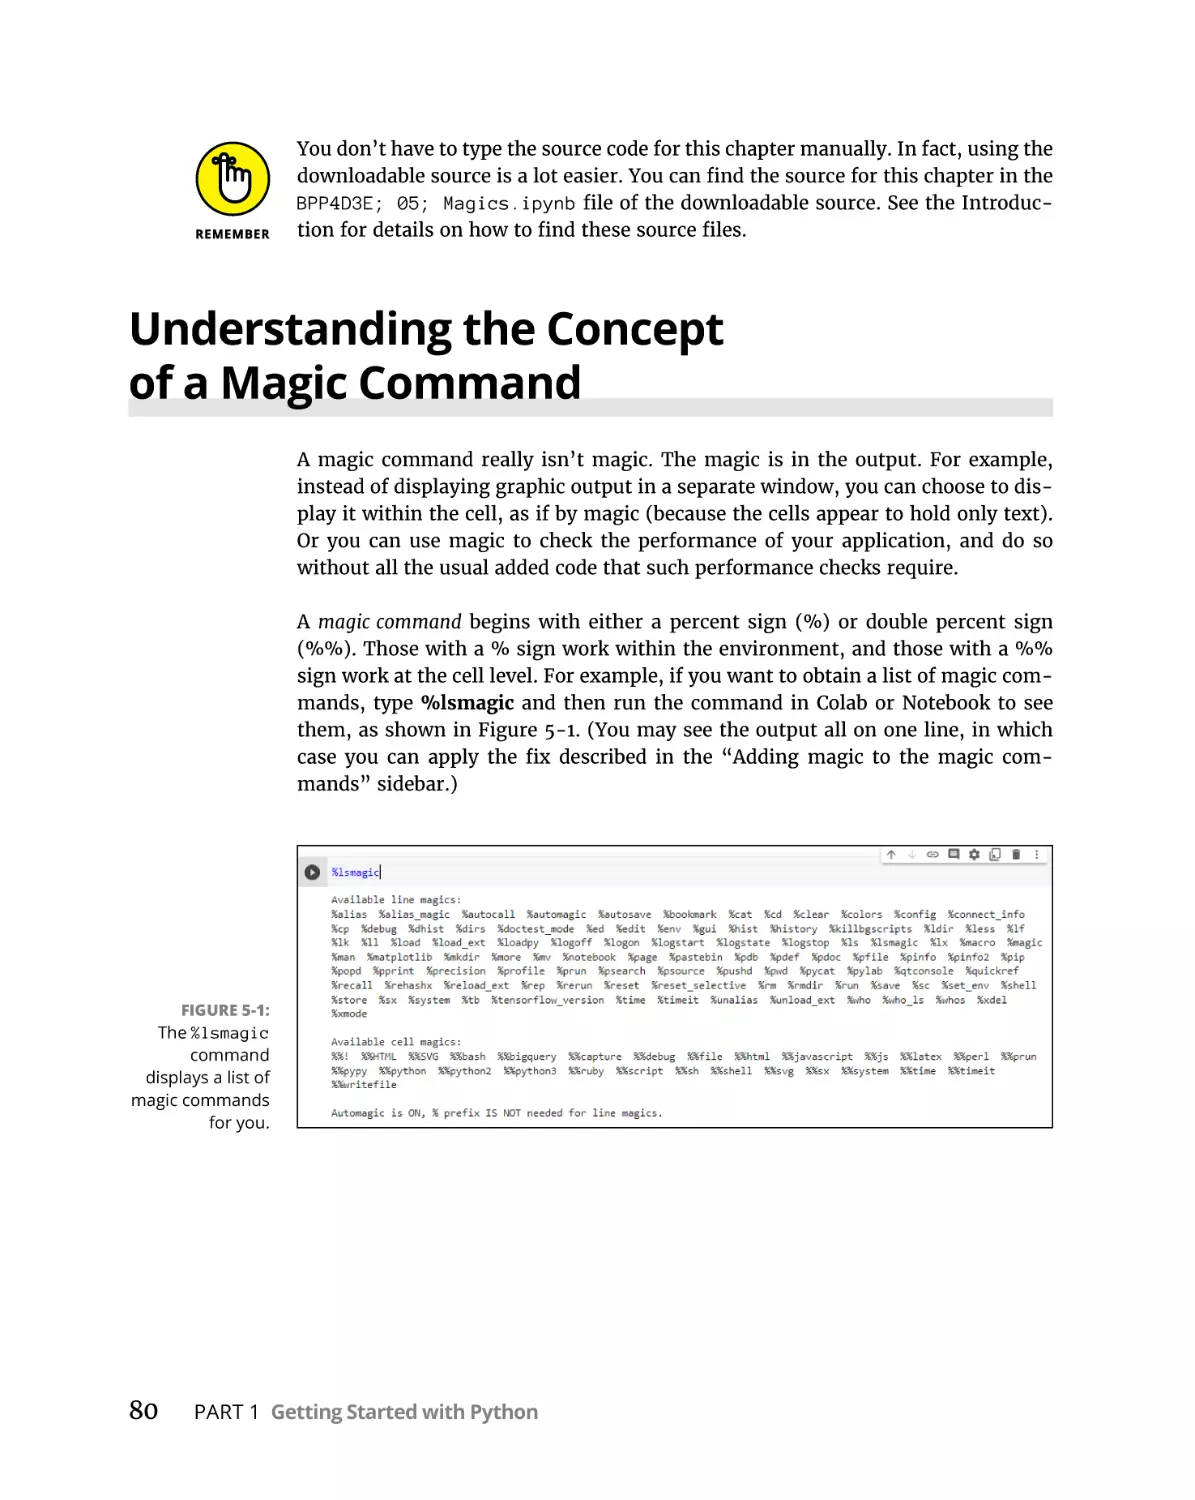 Understanding the Concept of a Magic Command